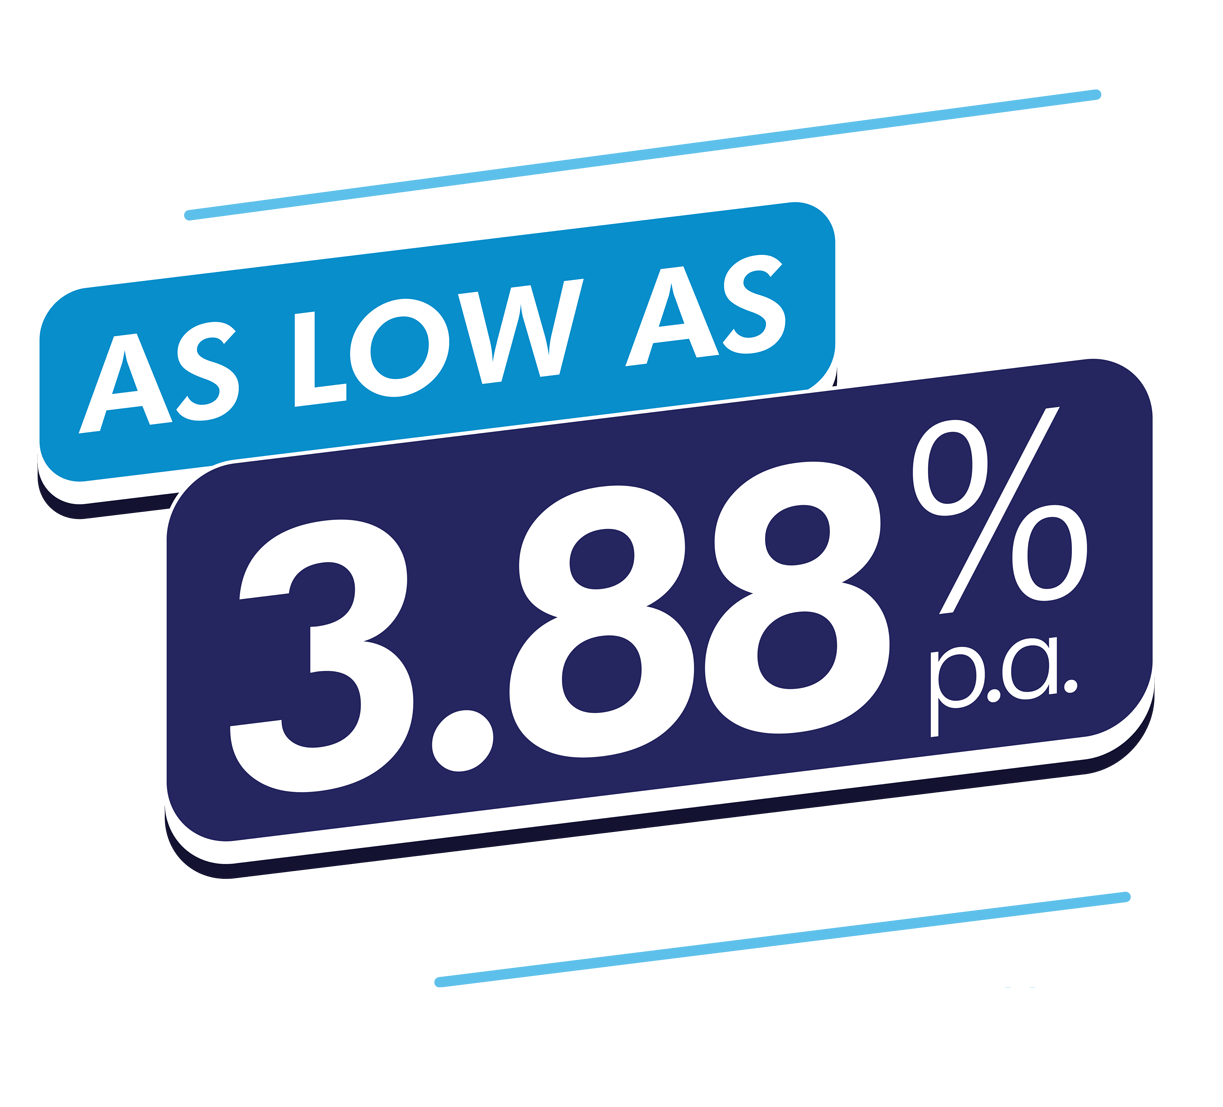 Personal Loan as low as 3.88% p.a.